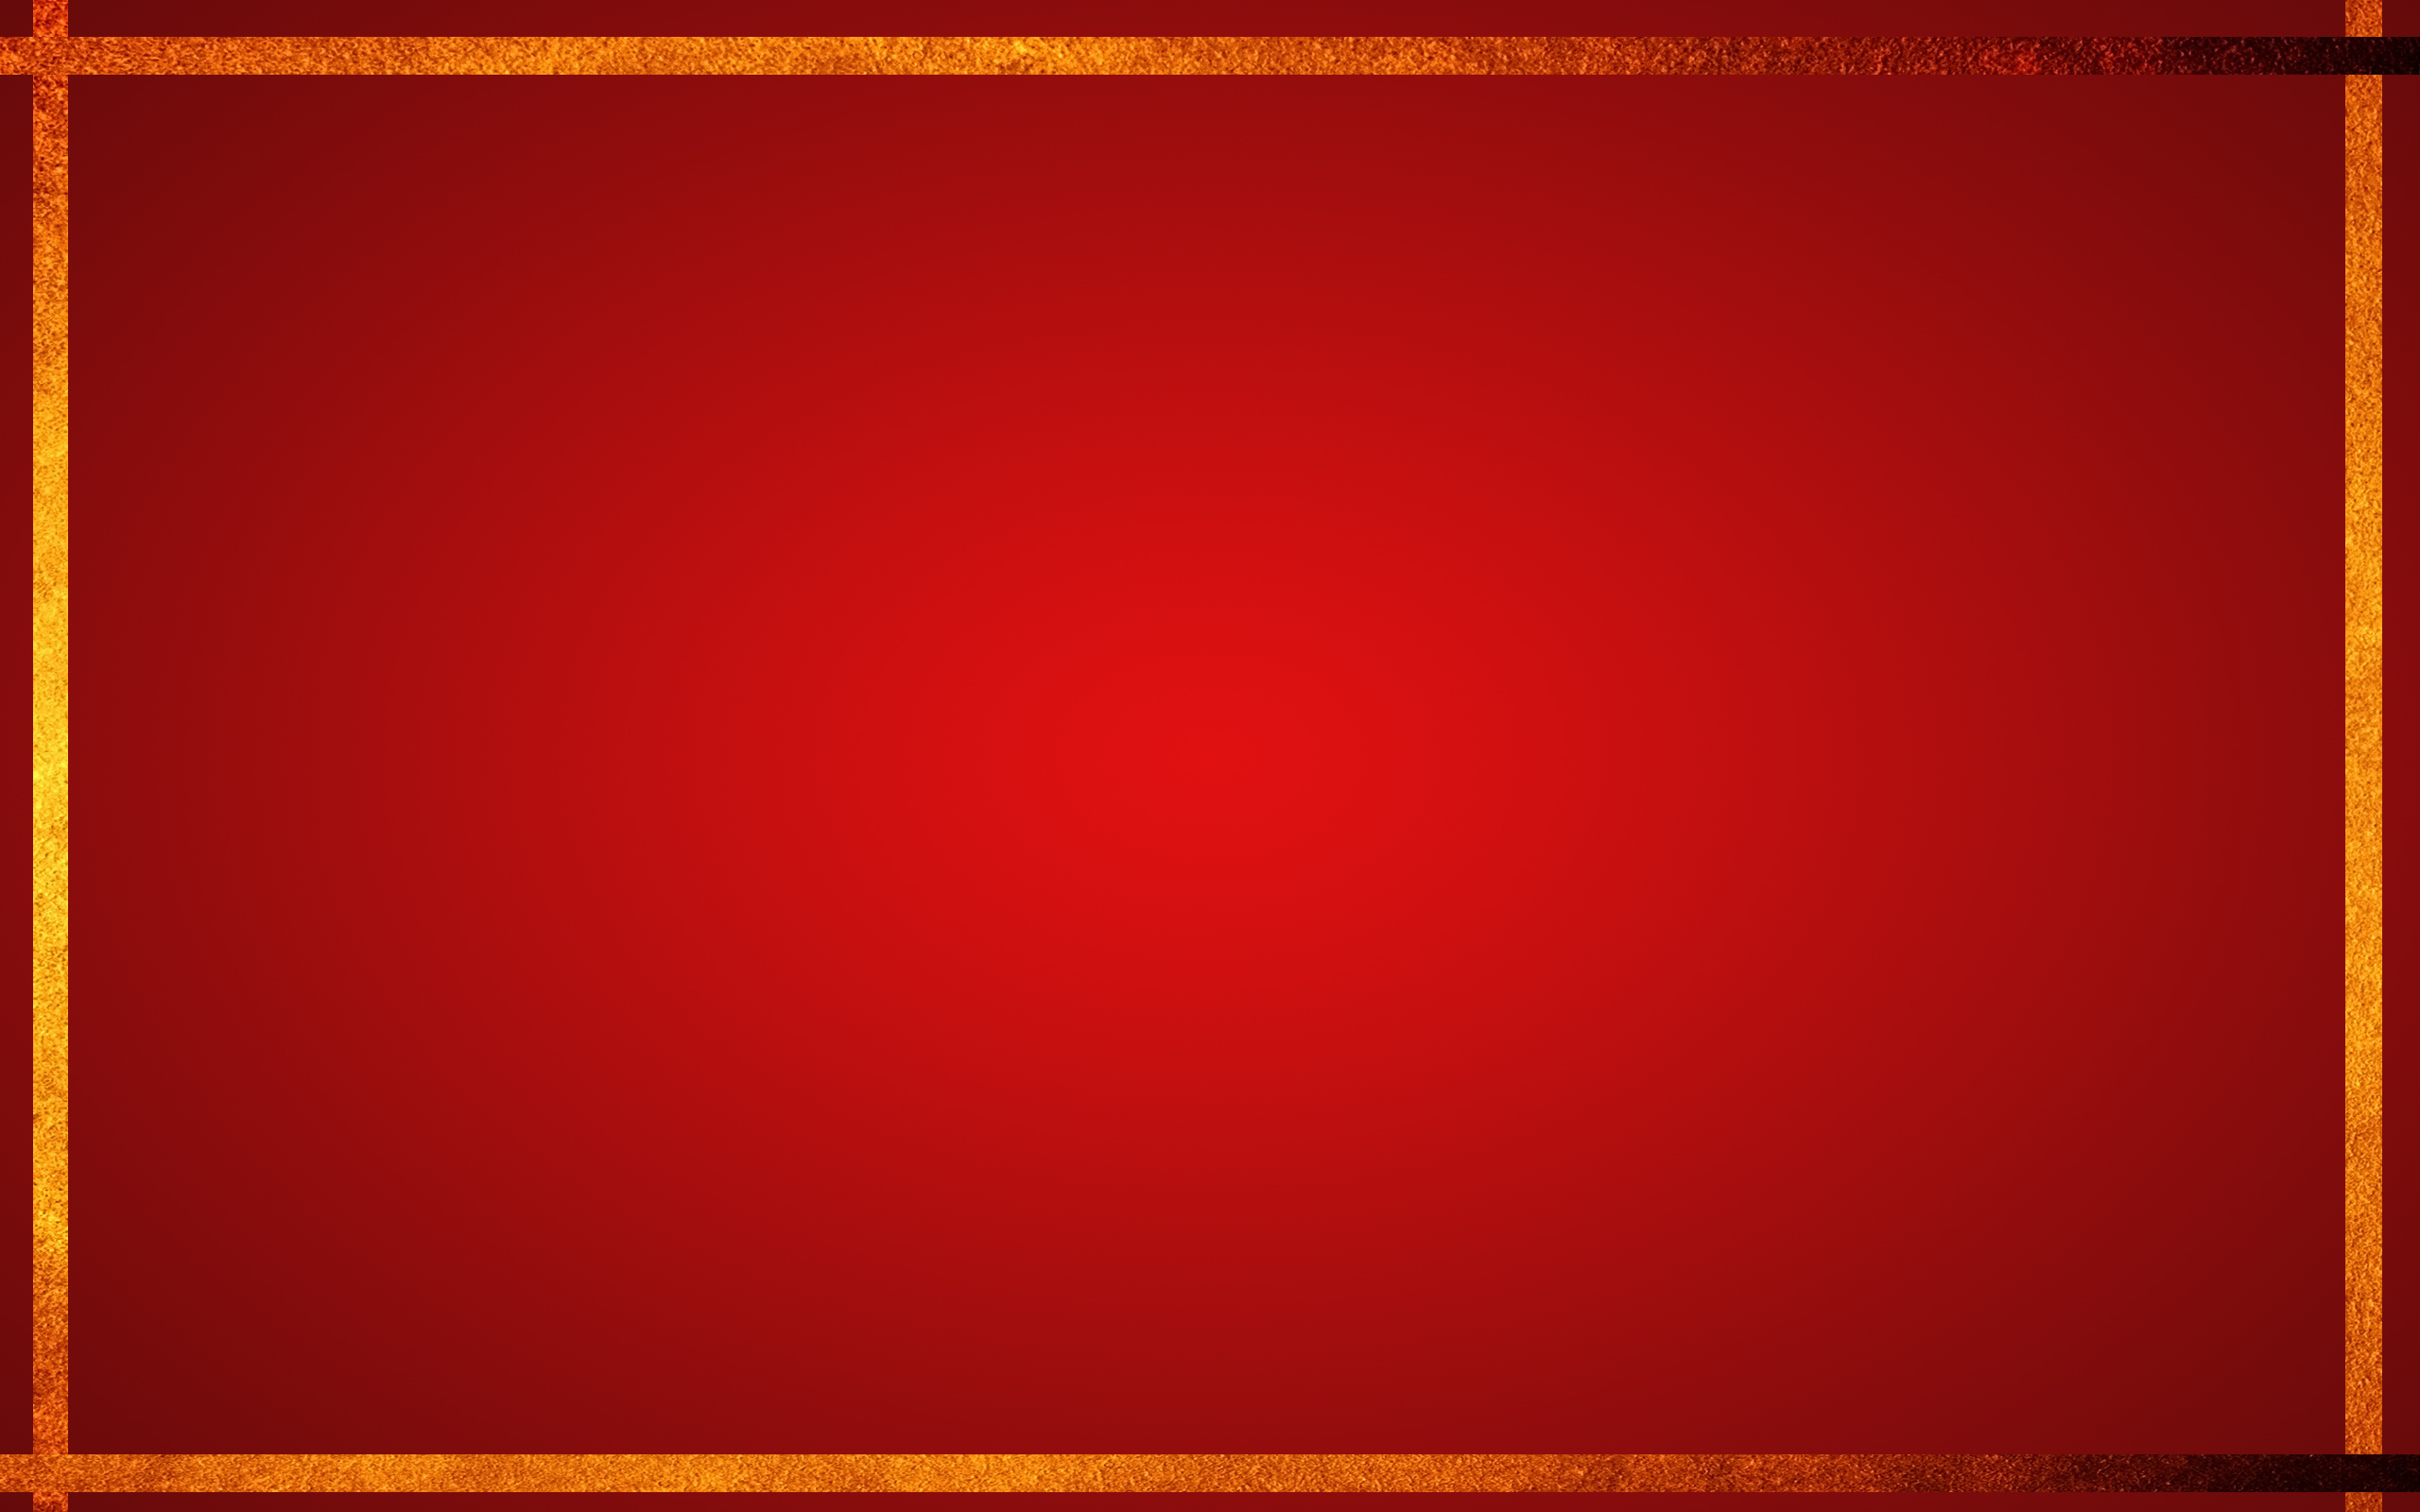 Red Chinese Wallpaper Designs 16 of 20 with Solid Red and Gold Border Wallpaper. Wallpaper Download. High Resolution Wallpaper